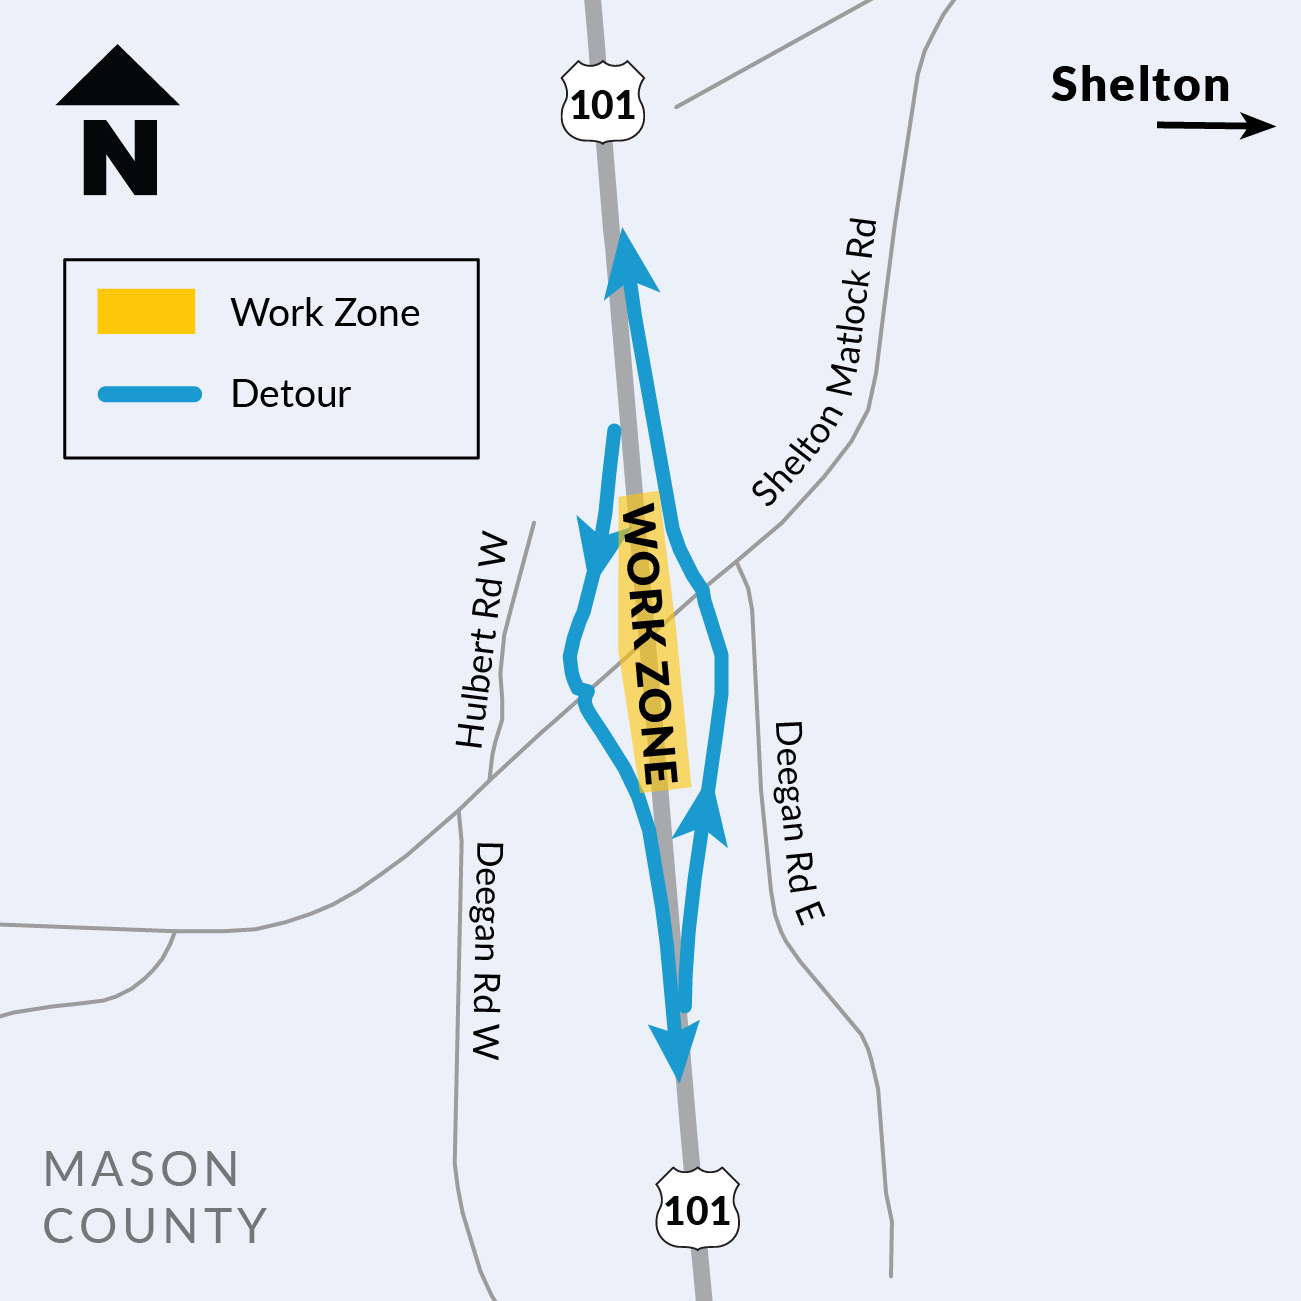 US 101 at Shelton Matlock Road detour map. Yellow overlay shows closed work zone on US 101 and blue lines show detour via ramps. 